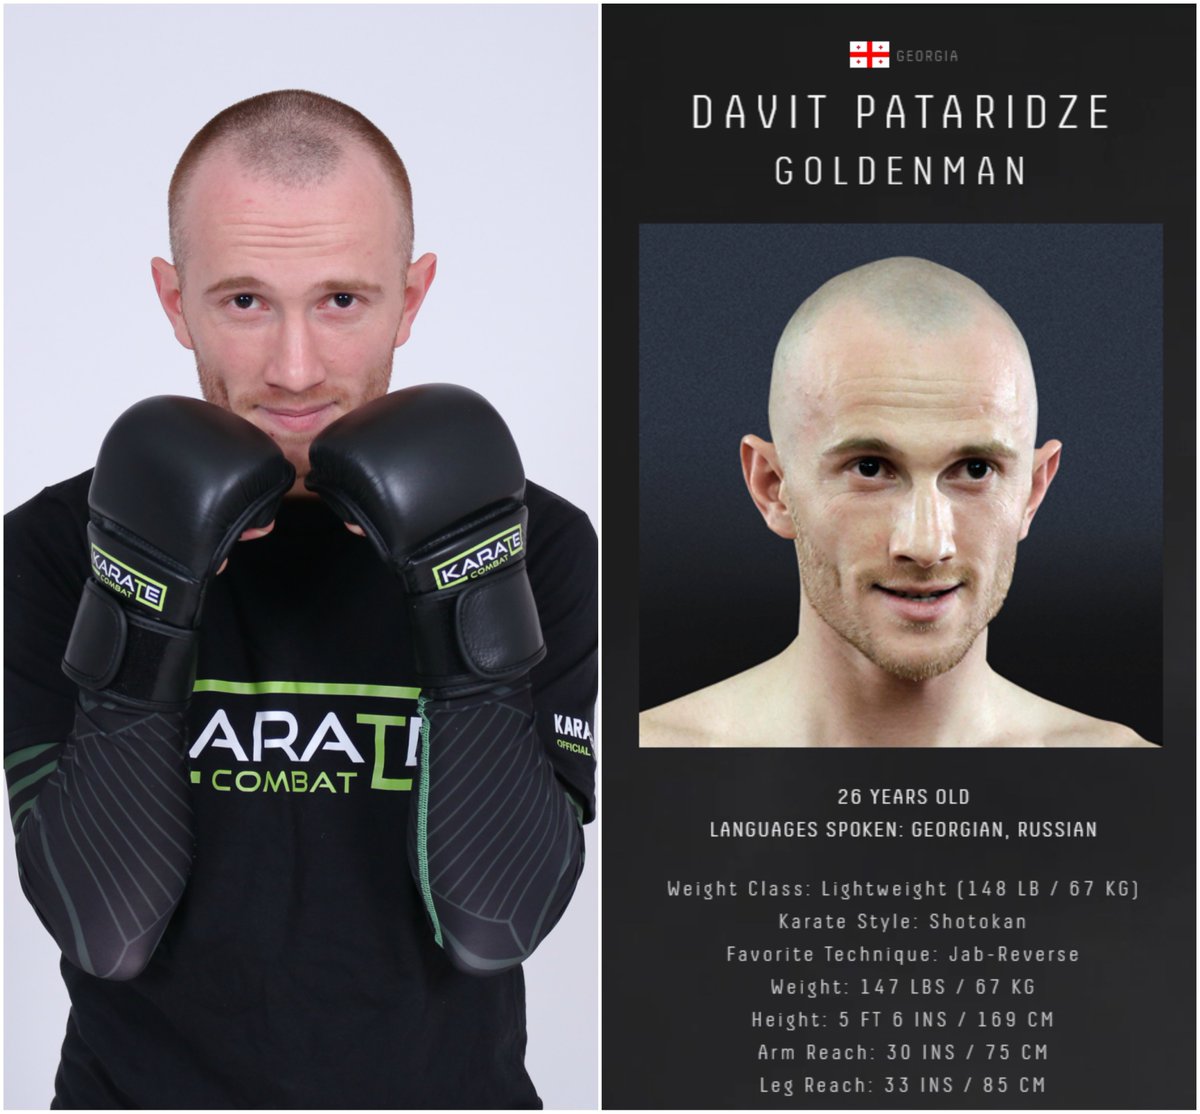 @Karate_Combat Fighter Davit Pataridze #GoldenMan👊 is getting ready to bring fire on Pit 🔥🔥🔥 New era of action karate is beginning right now! Stay tuned and follow #GoldenMan on Facebook and Instagram @datapataridze13